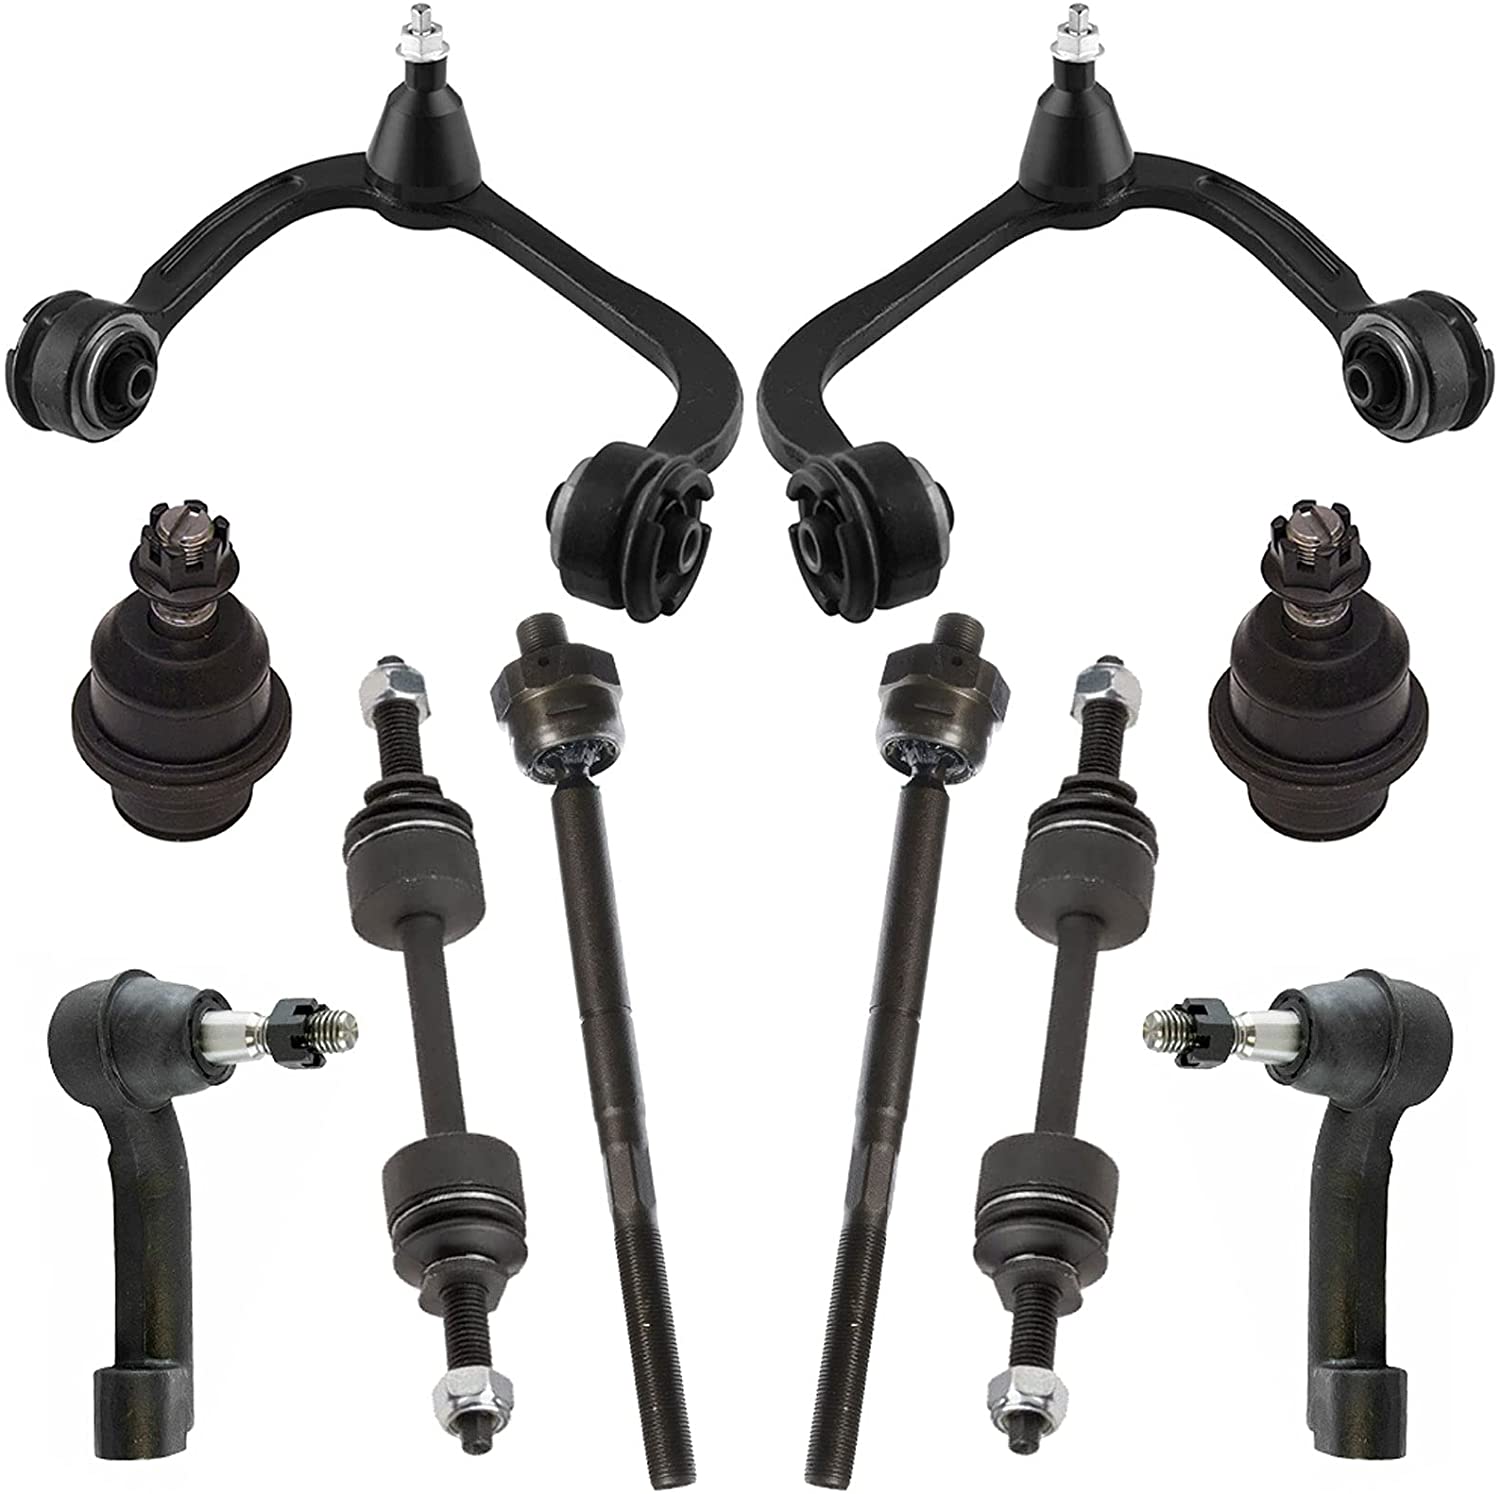 MotorbyMotor 10pc Front Upper and Lower Control Arm Suspension Kit